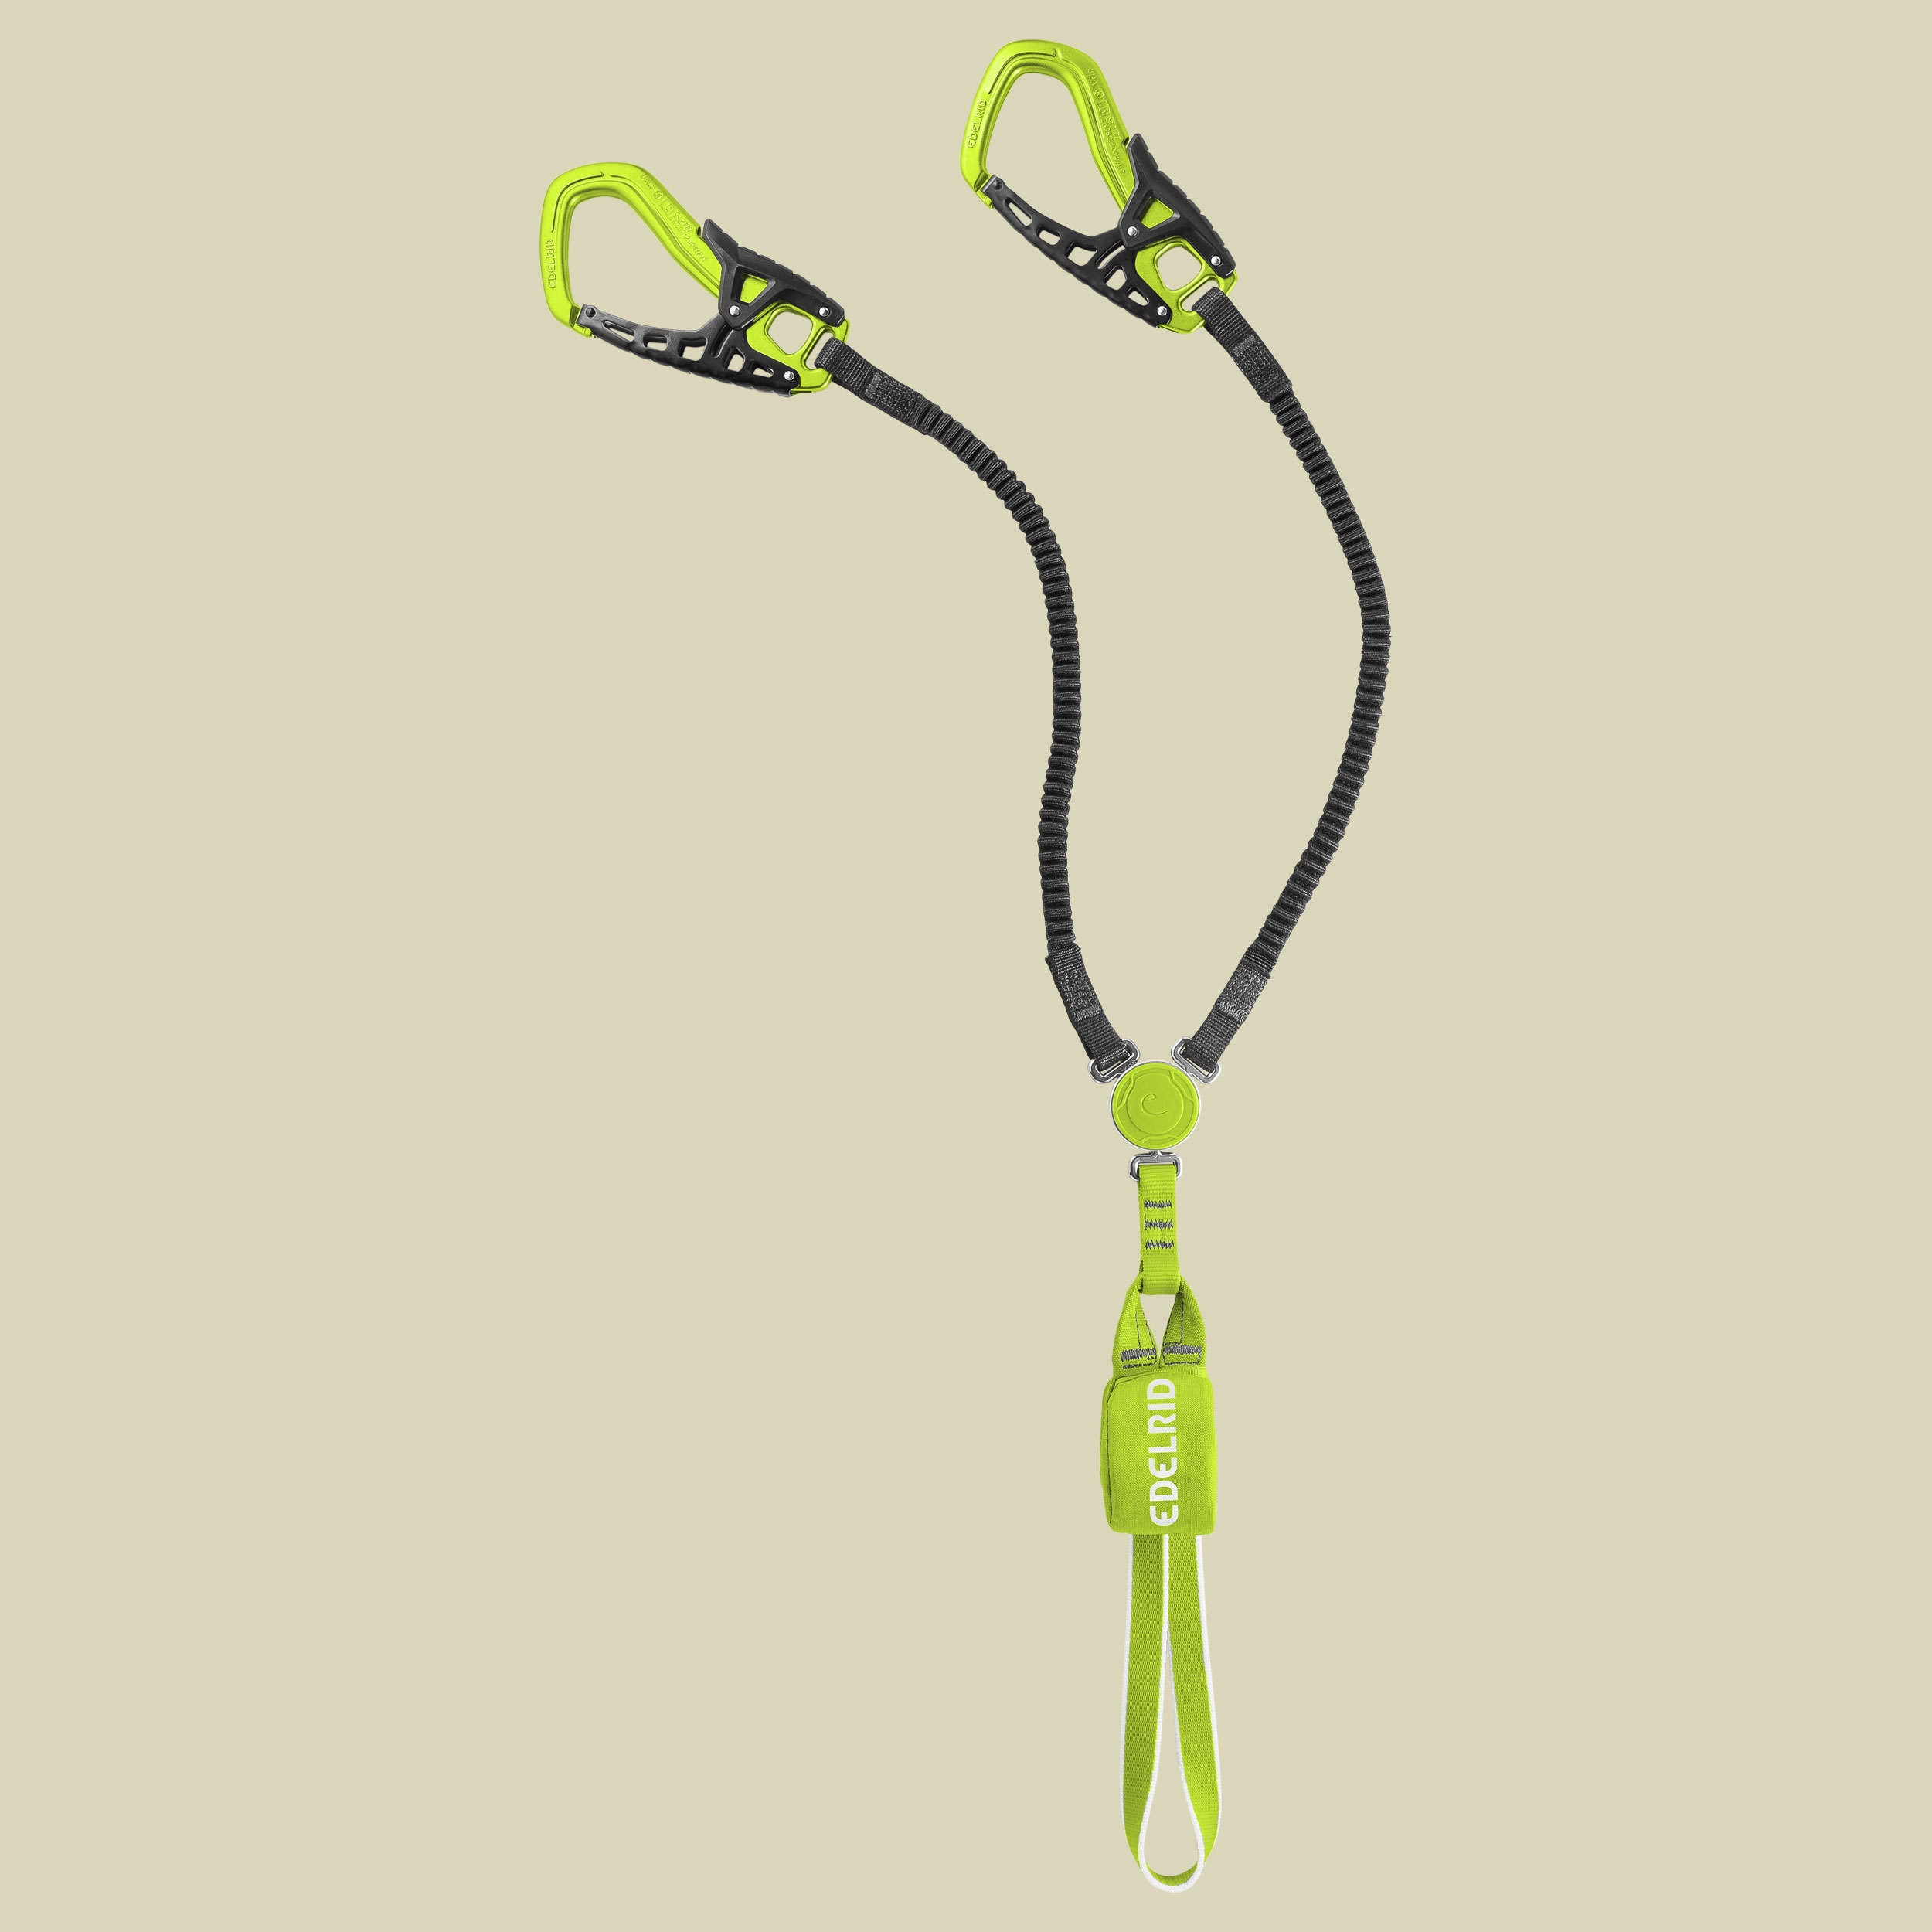 Cable Comfort Tri